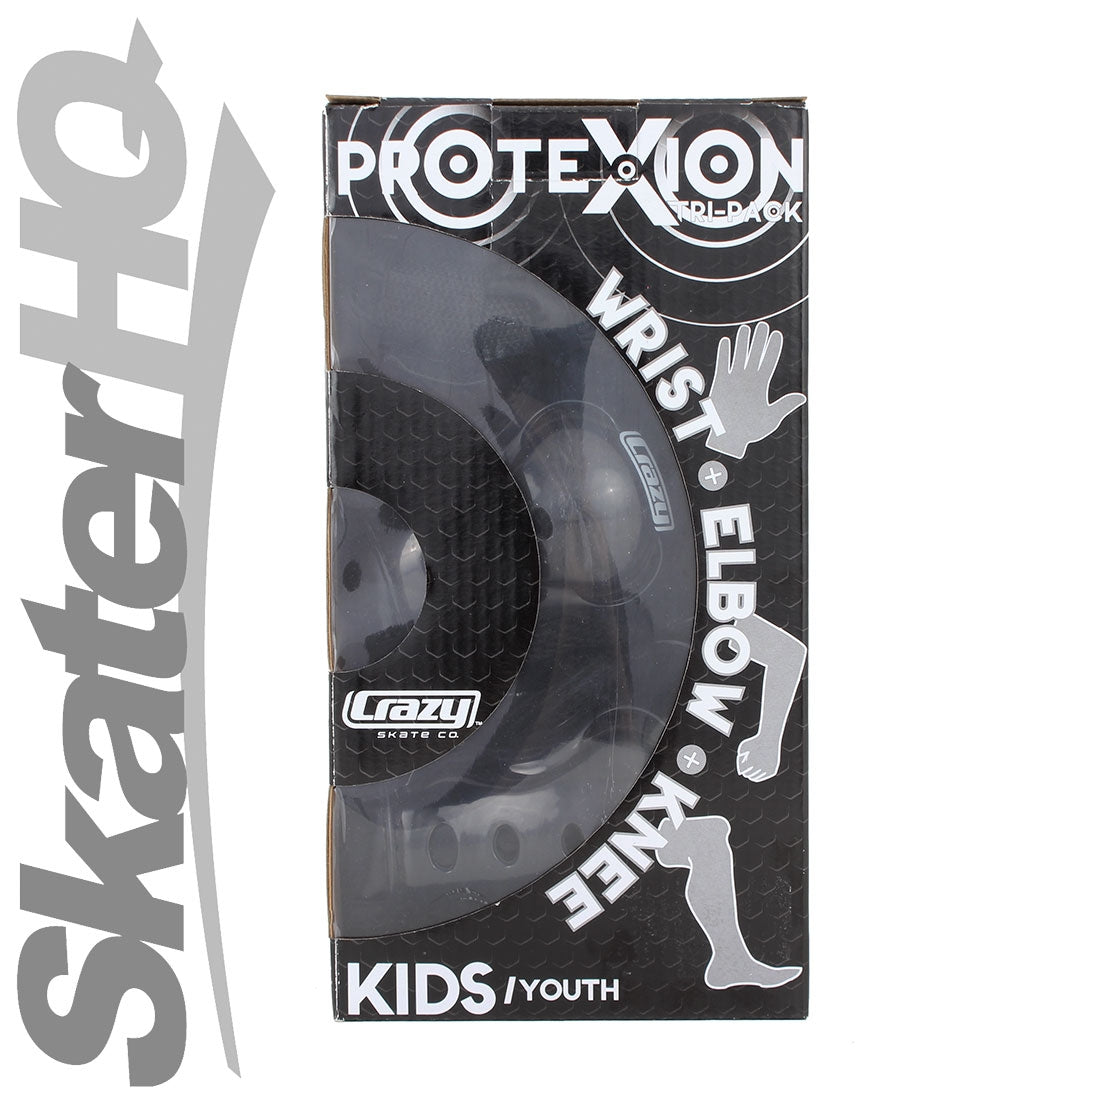 Crazy ProteXion Kids Tri-Pack - Black Protective Gear